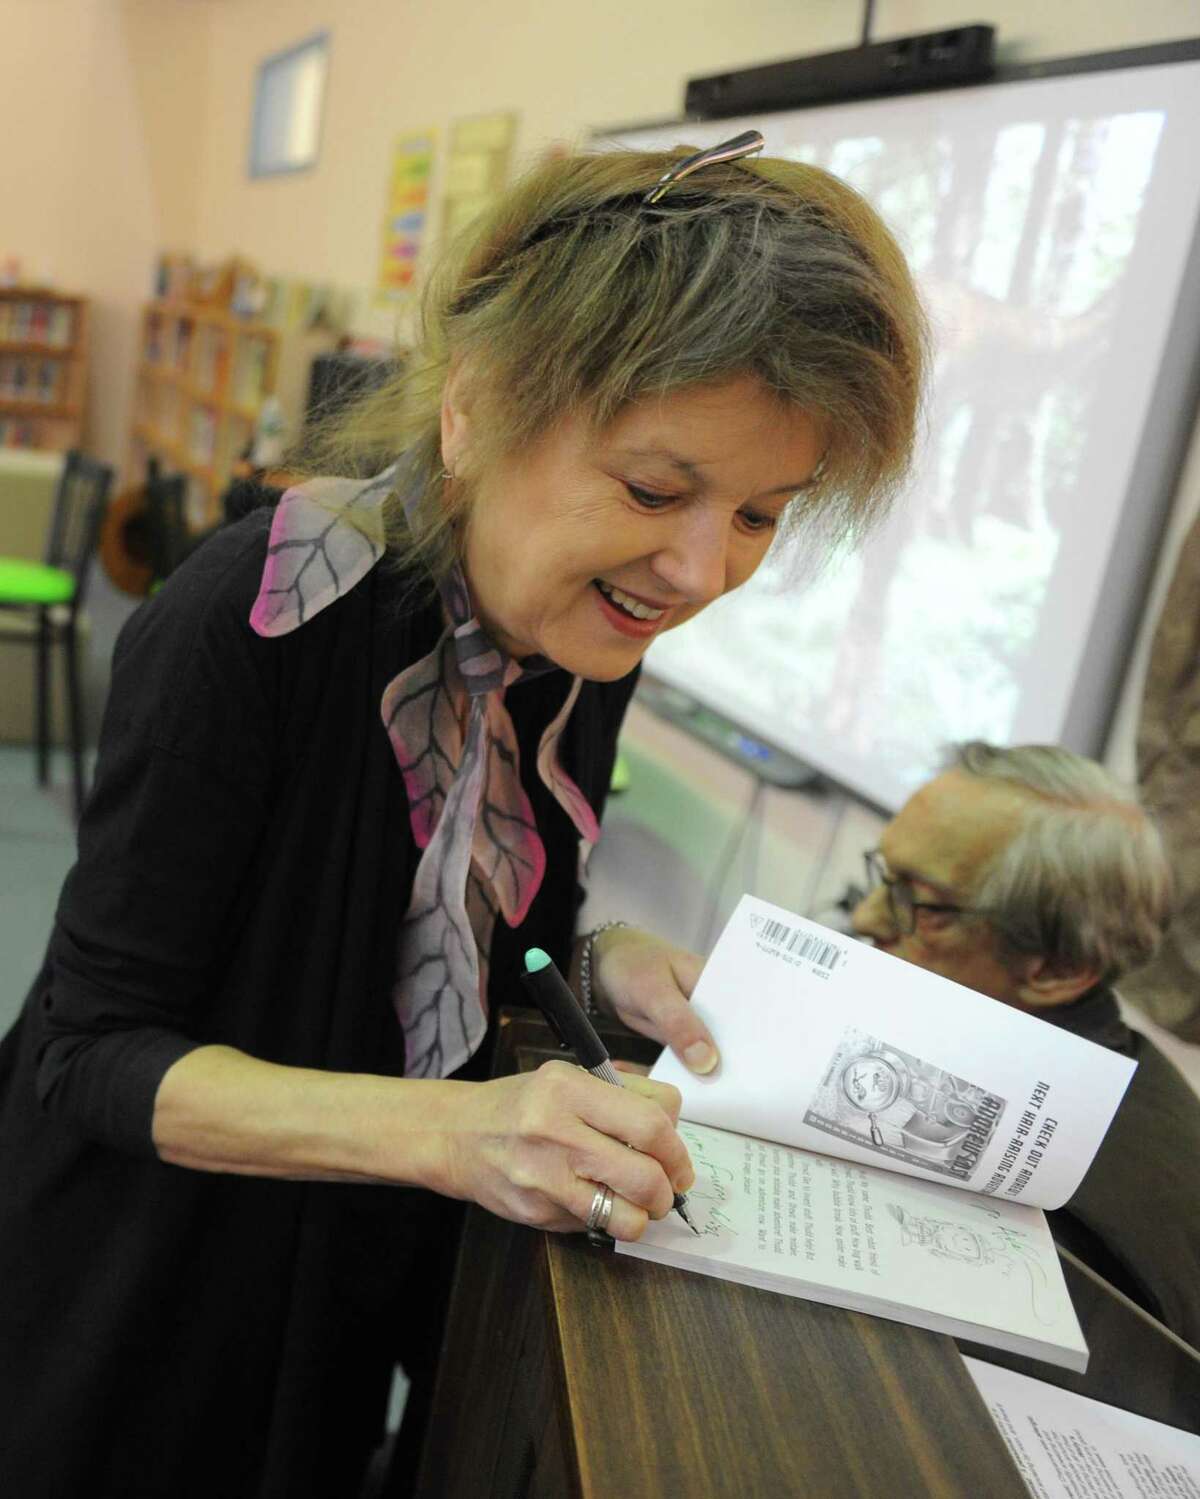 Author Judith (J.C.) Greenburg signs a copy of one of her book before speaking about the inspiration for her children's book at Cos Cob School in the Cos Cob section of Greenwich, Conn. Tuesday, Jan. 23, 2018. Judith Greenburg pens the "Andrew Lost" series. Also speaking was her husband, Dan Greenburg, author of the "Zack Files" and "Weird Planet" series.